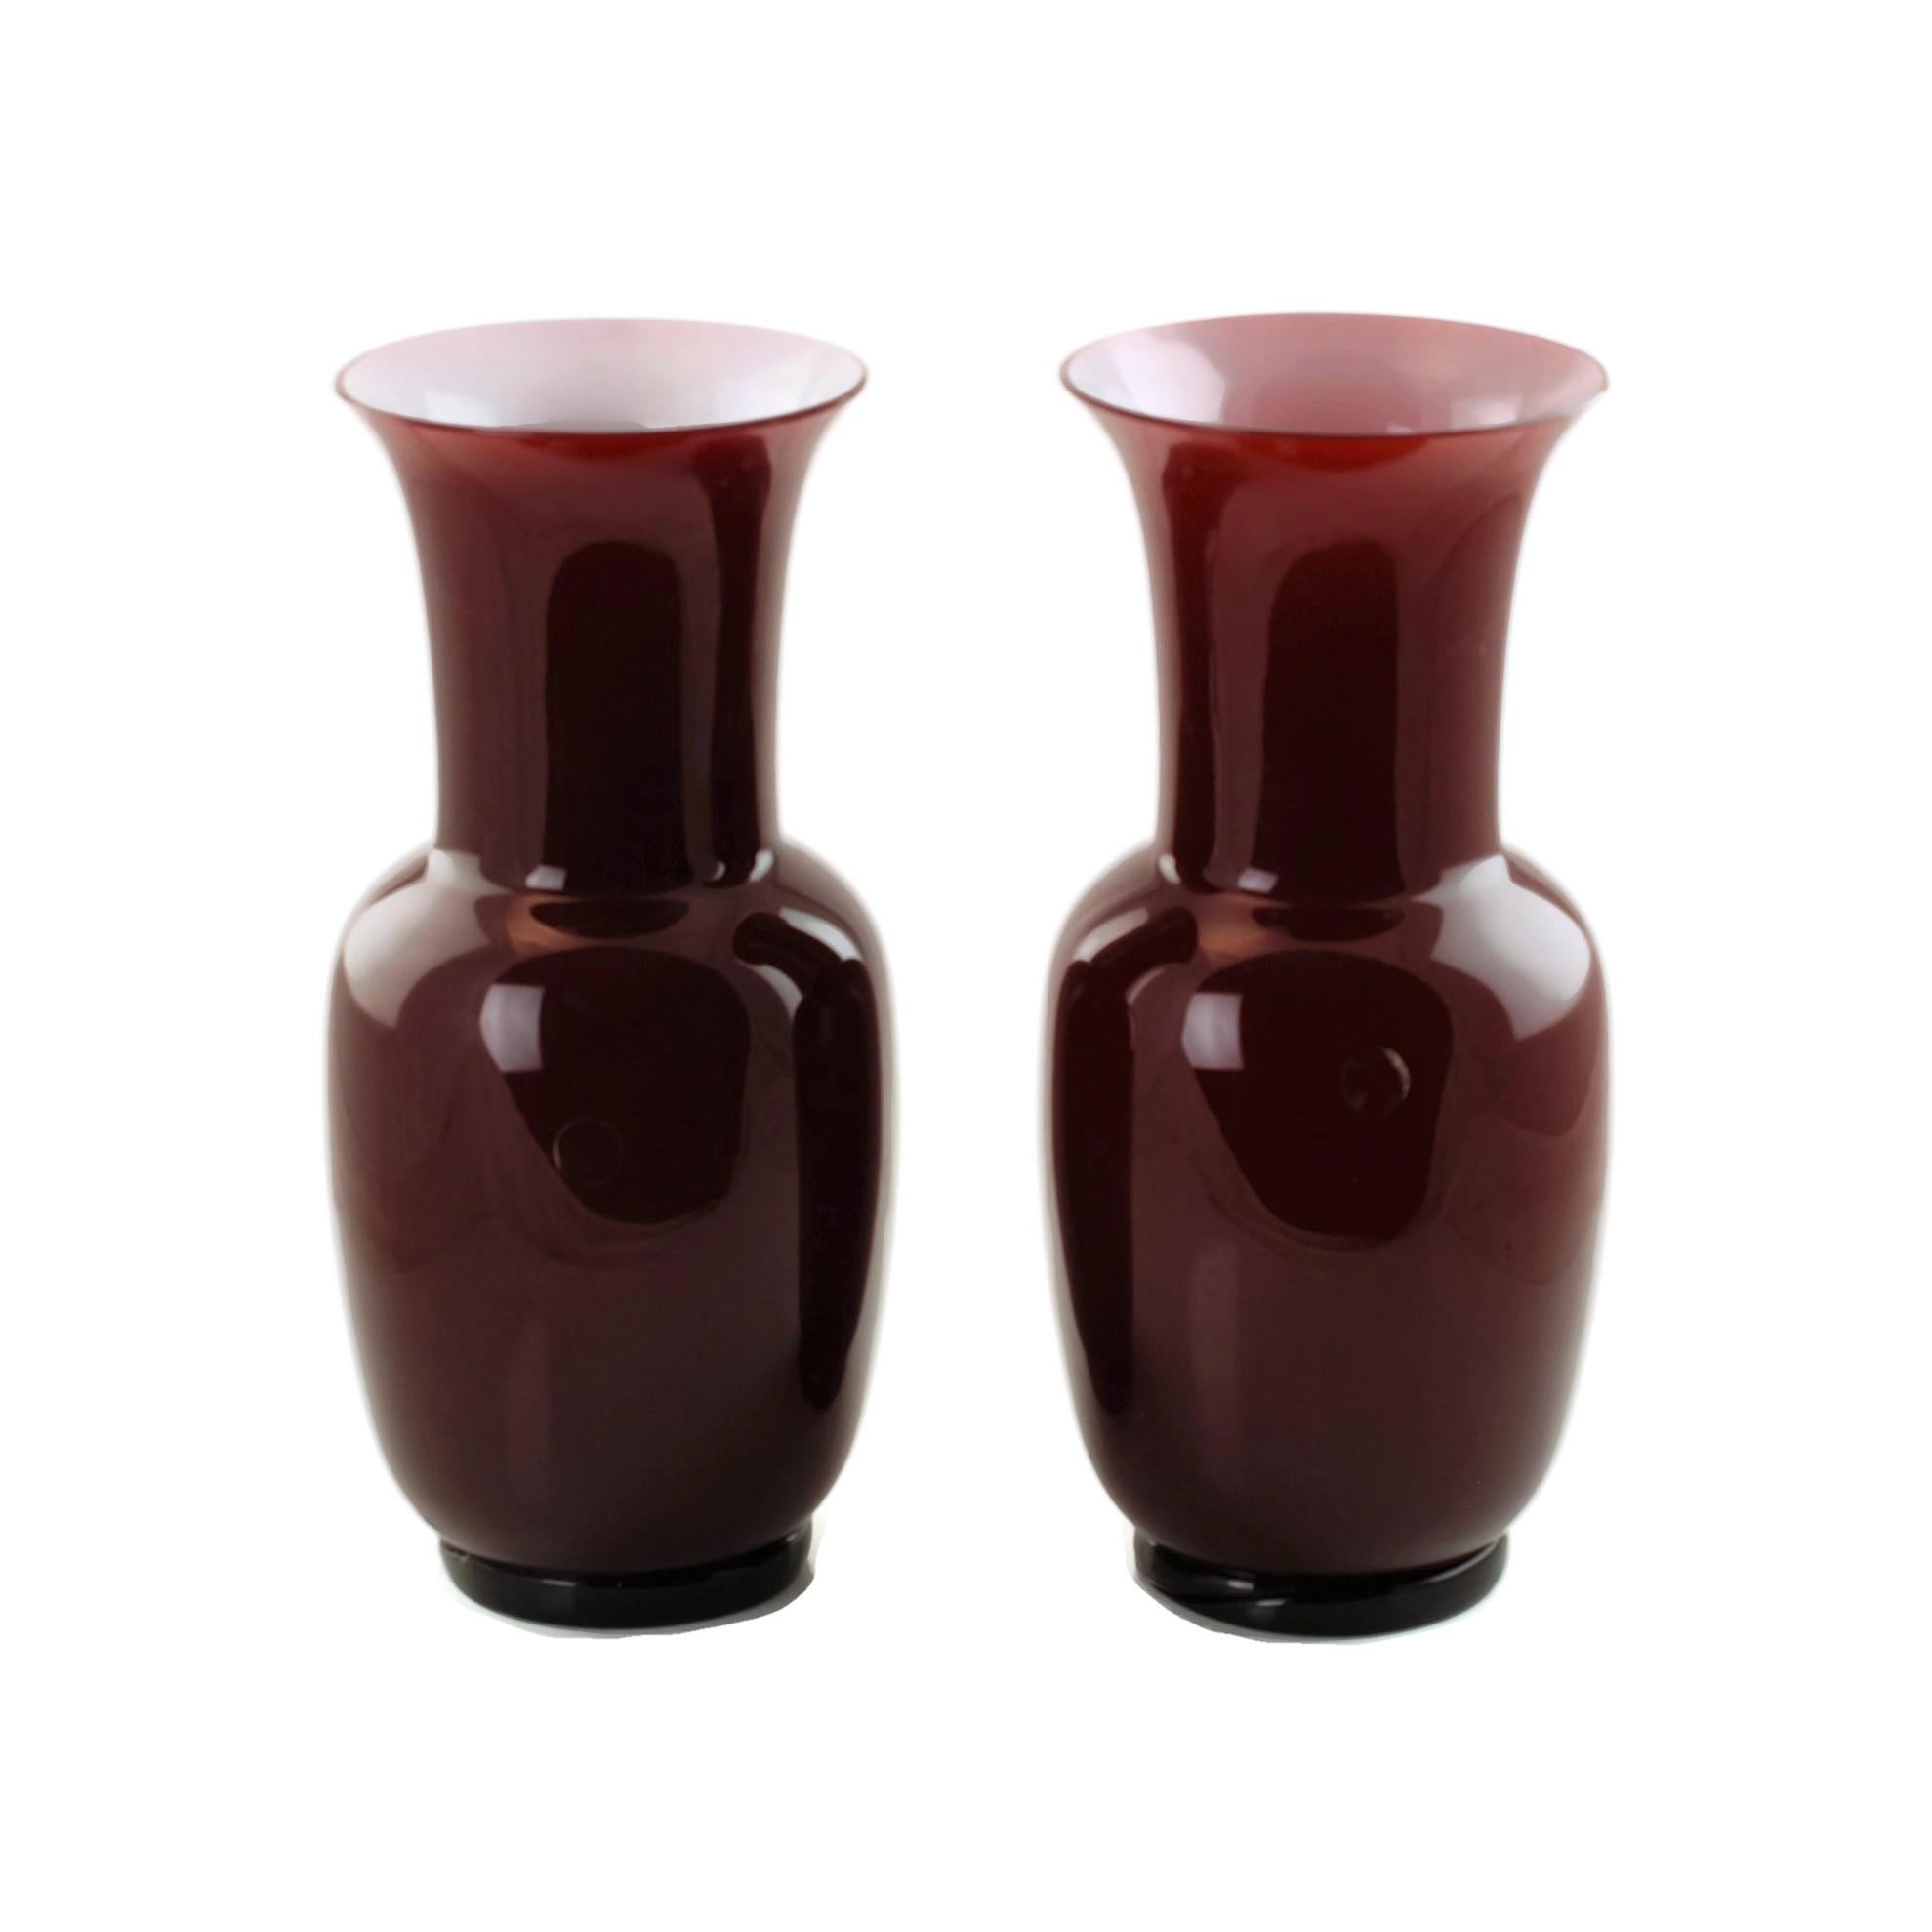 This elegant pair of late 20th century Venini opalino vases feature ruby red Oxblood glass with Lattimo 